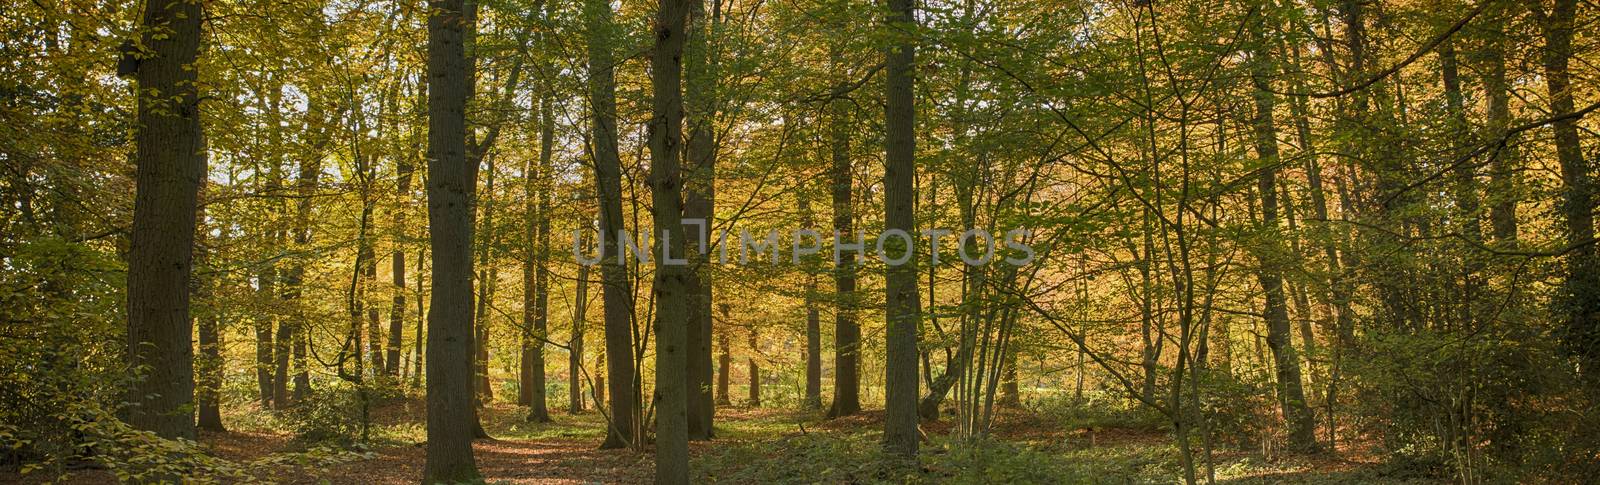 forest in autumn colors like gold red and orange by compuinfoto